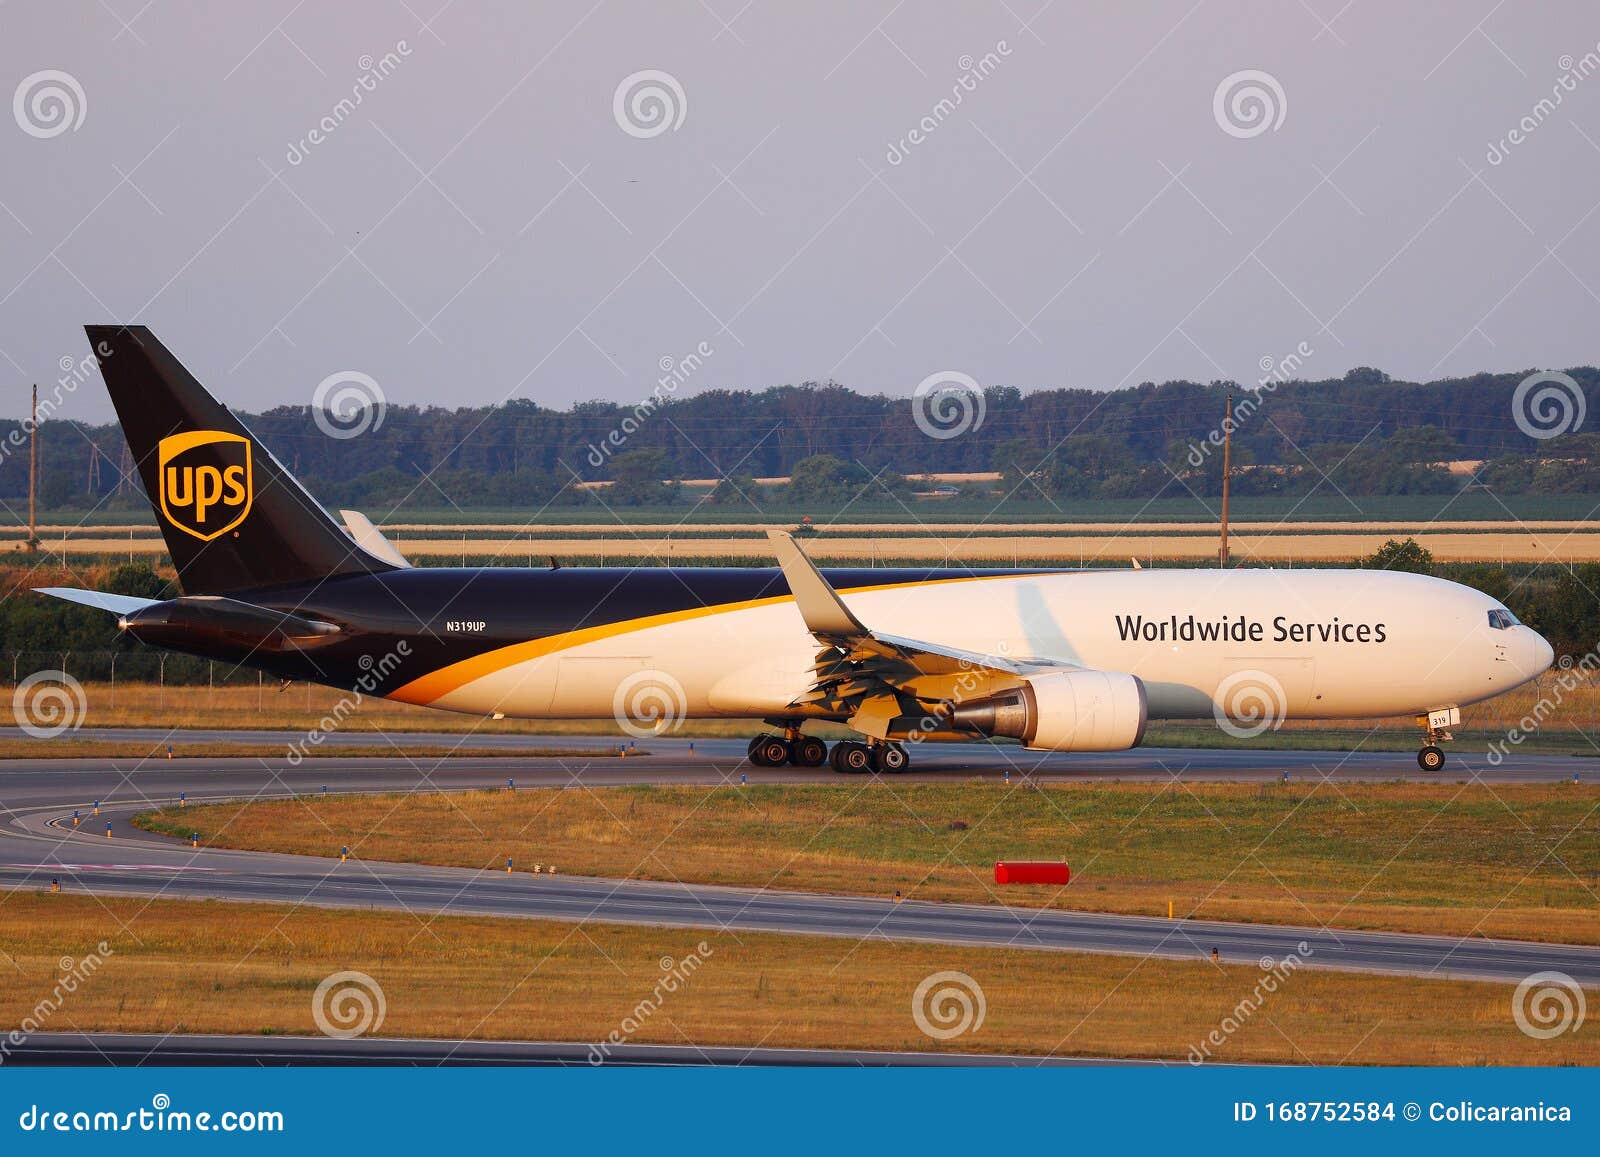 ups airlines plane taxiing editorial stock image image of arrival 168752584